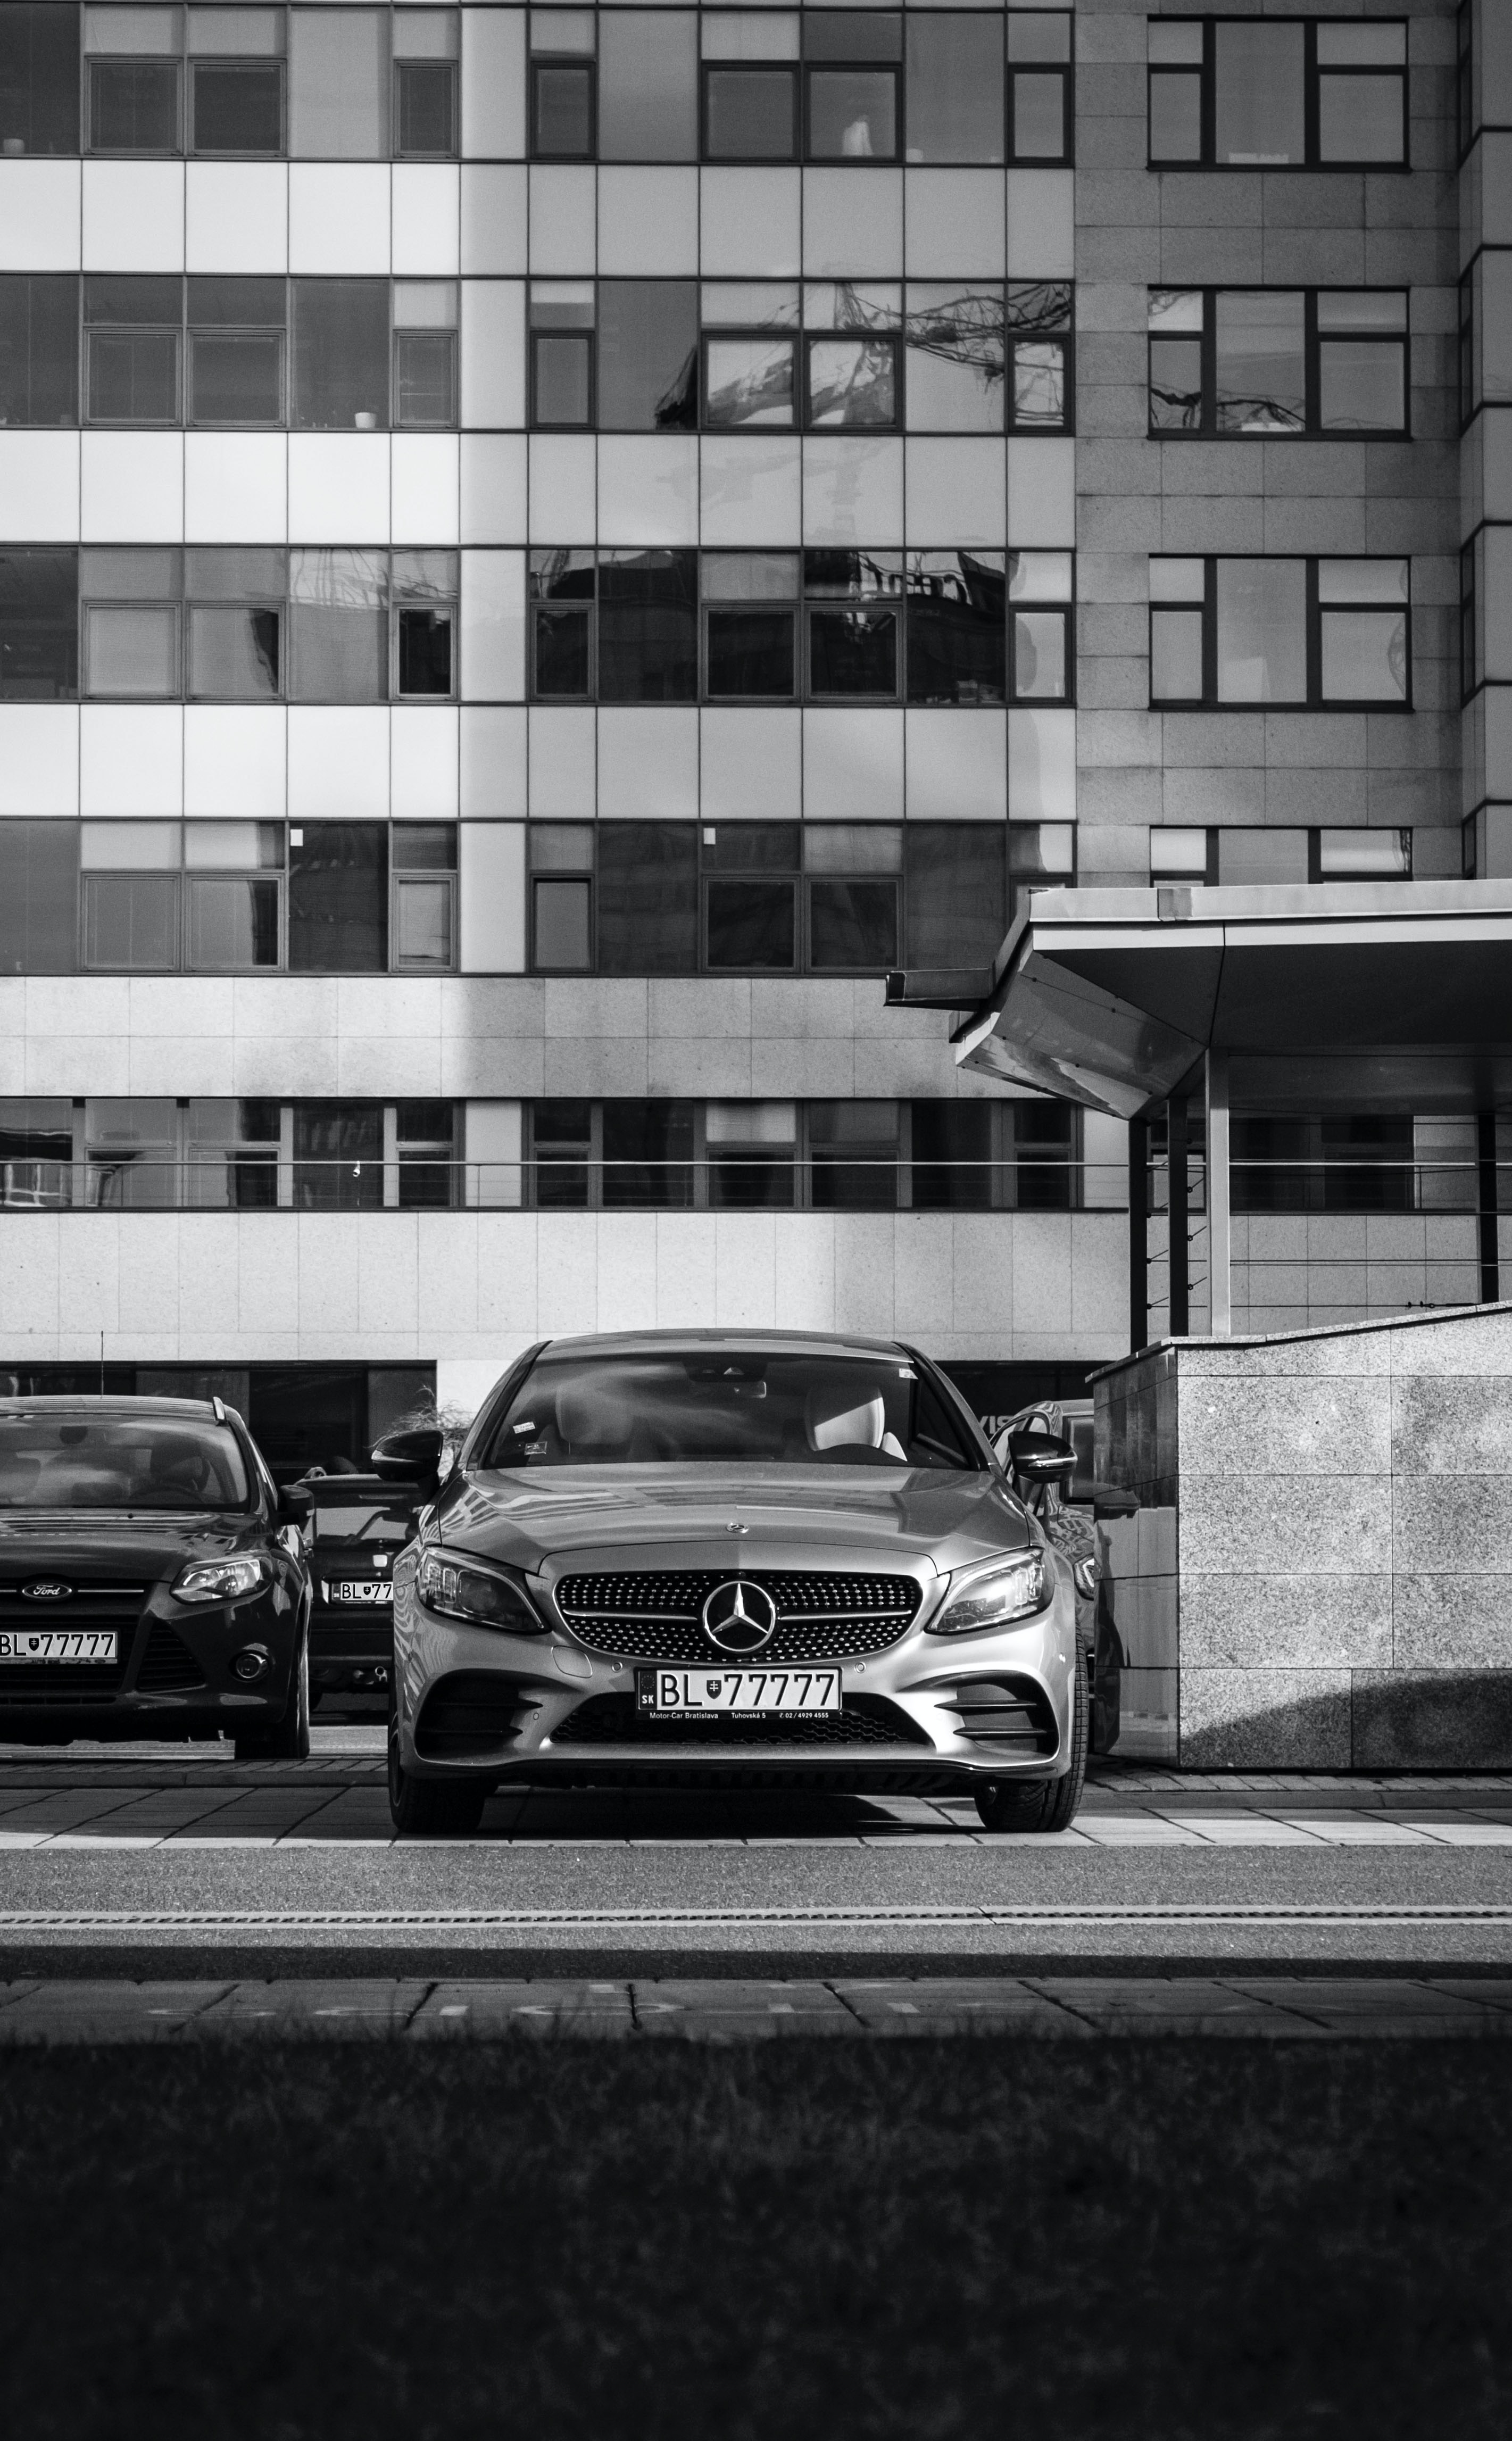 mercedes benz, cars, car, front view, bw, chb wallpapers for tablet